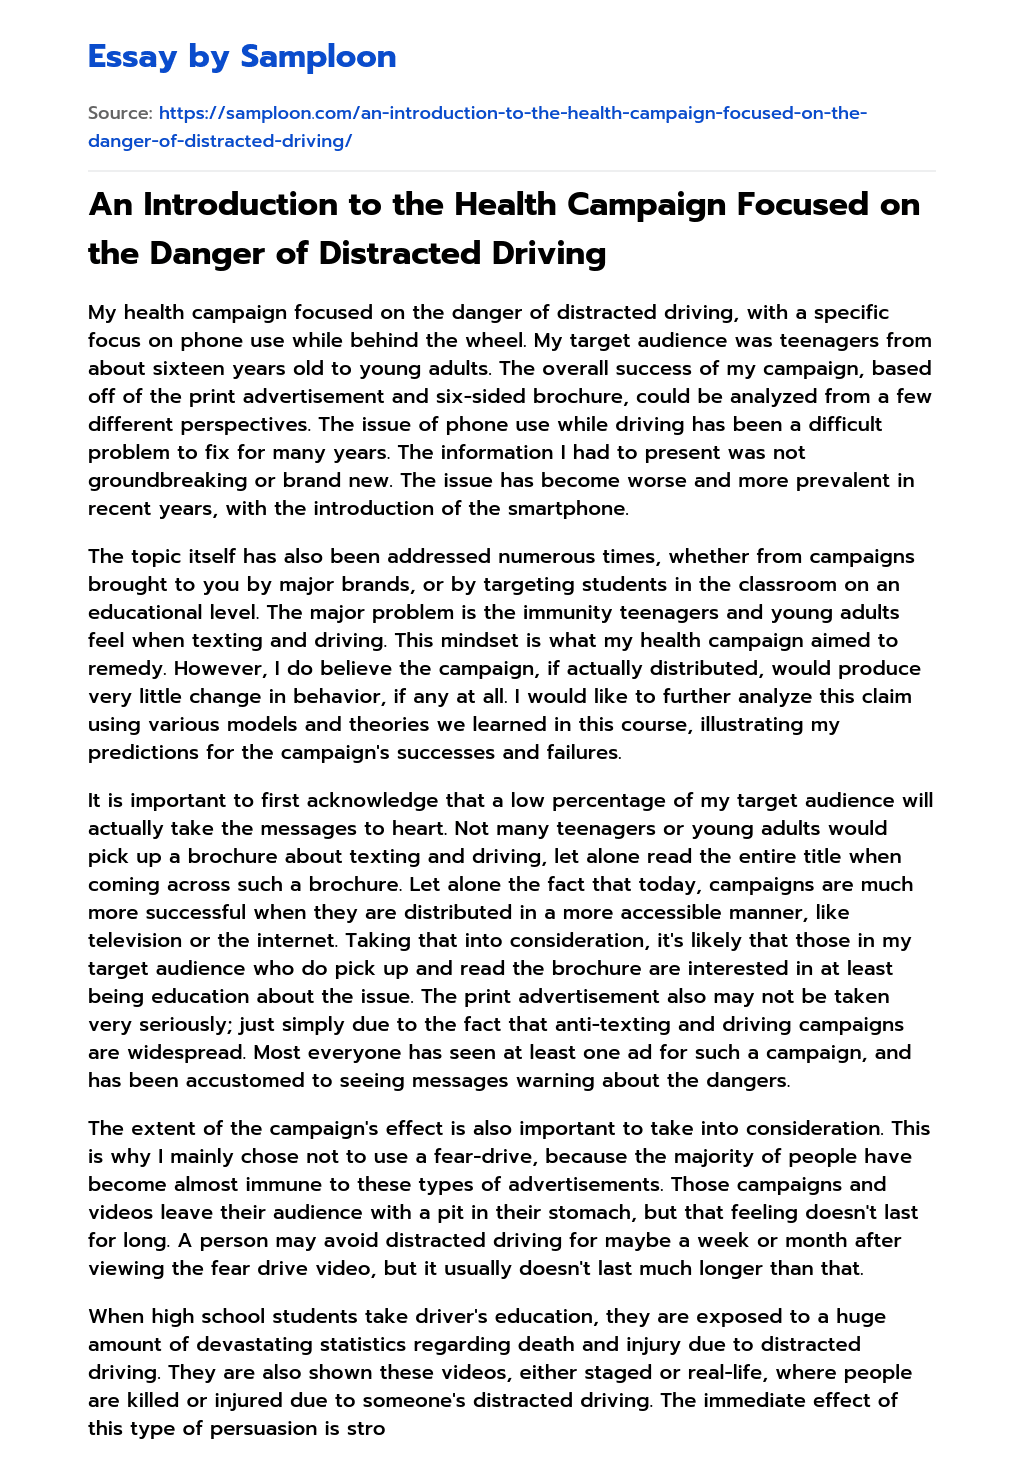 An Introduction to the Health Campaign Focused on the Danger of Distracted Driving essay